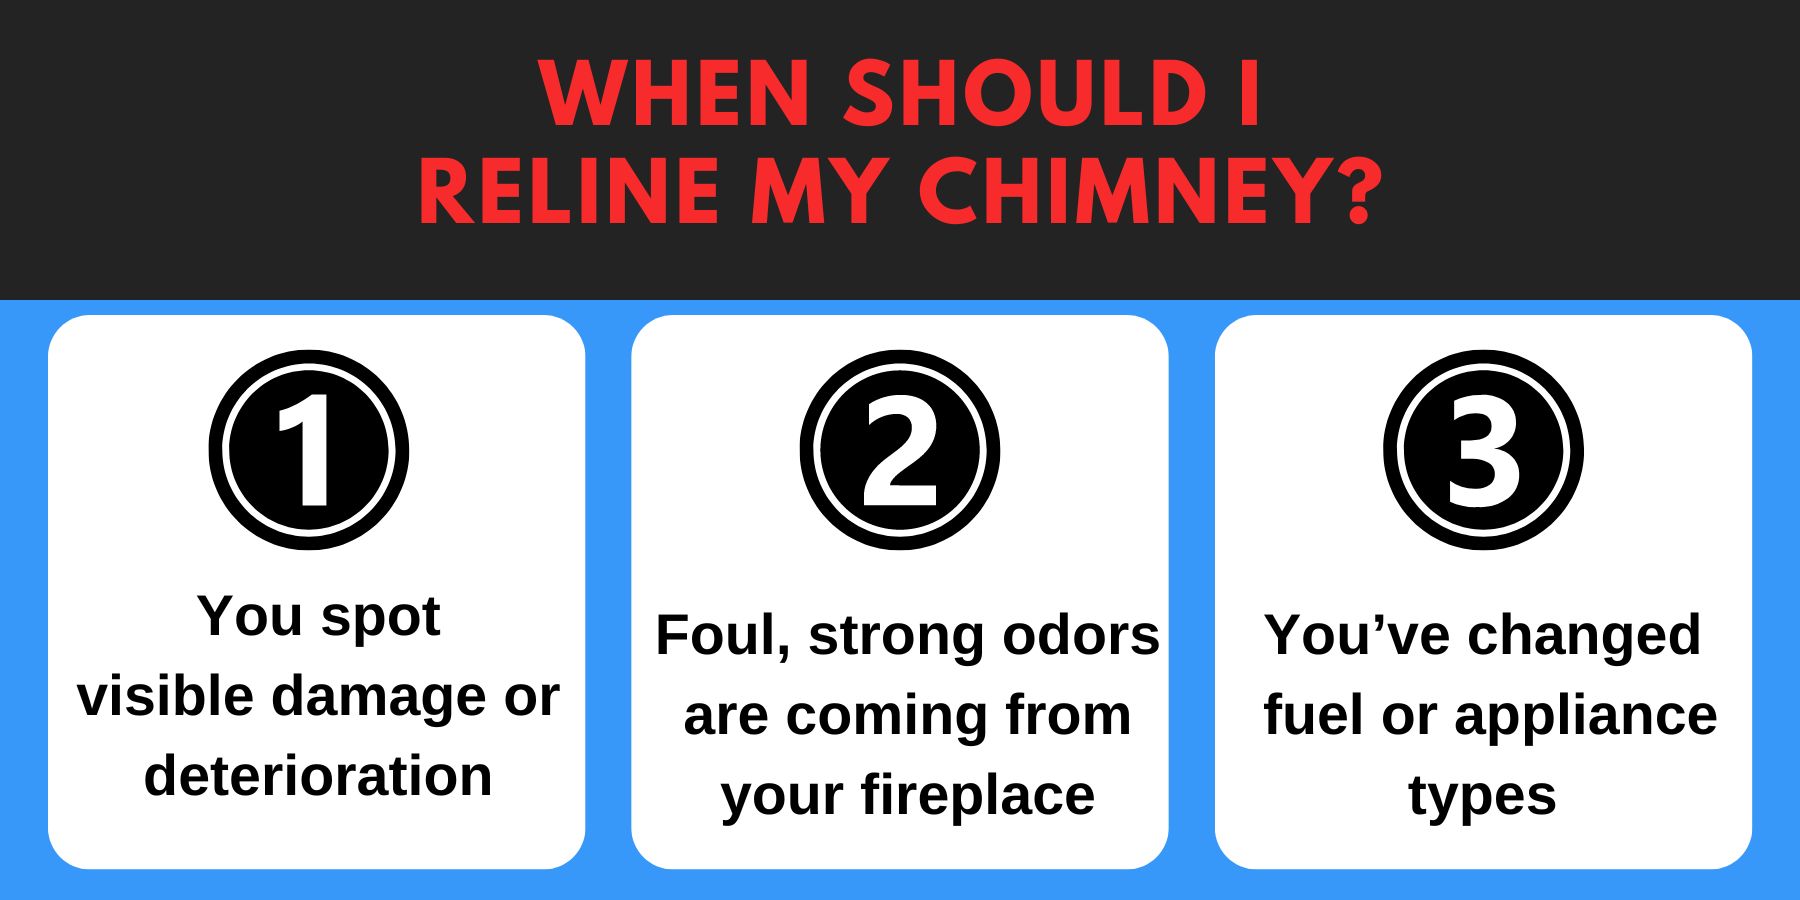 original infographic stating when should I reline my chimney